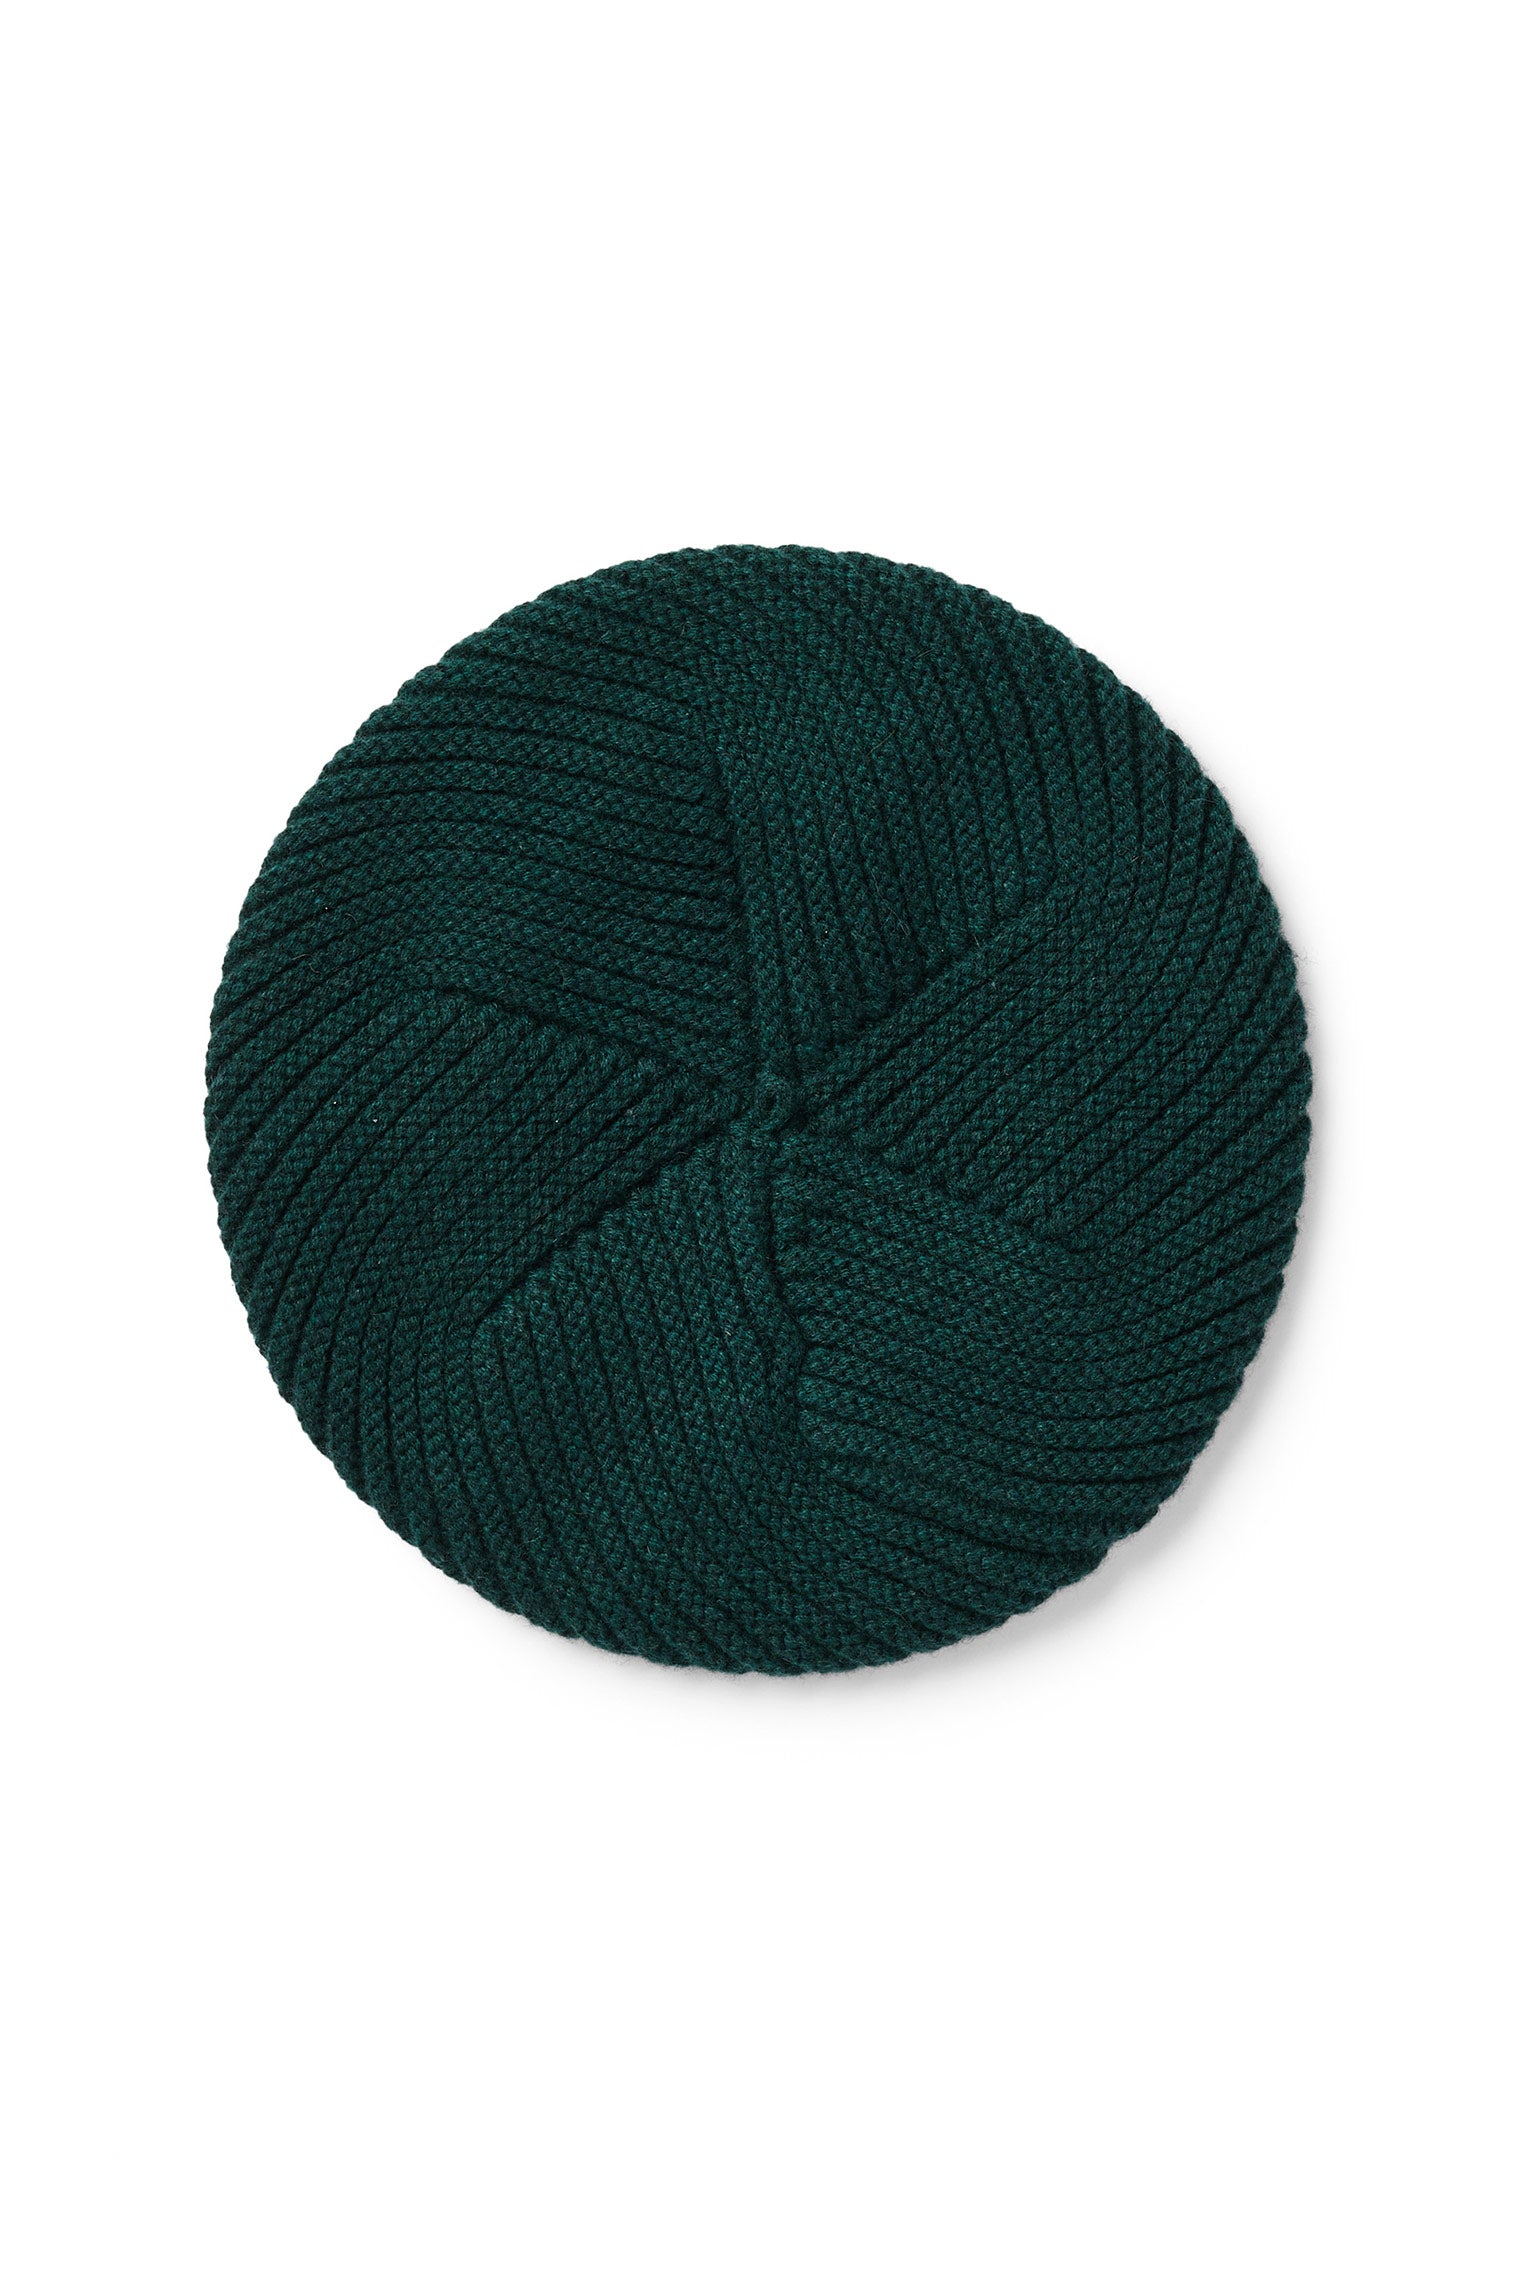 Green Knitted Cashmere Beret - New Season Hat Collection - Lock & Co. Hatters London UK